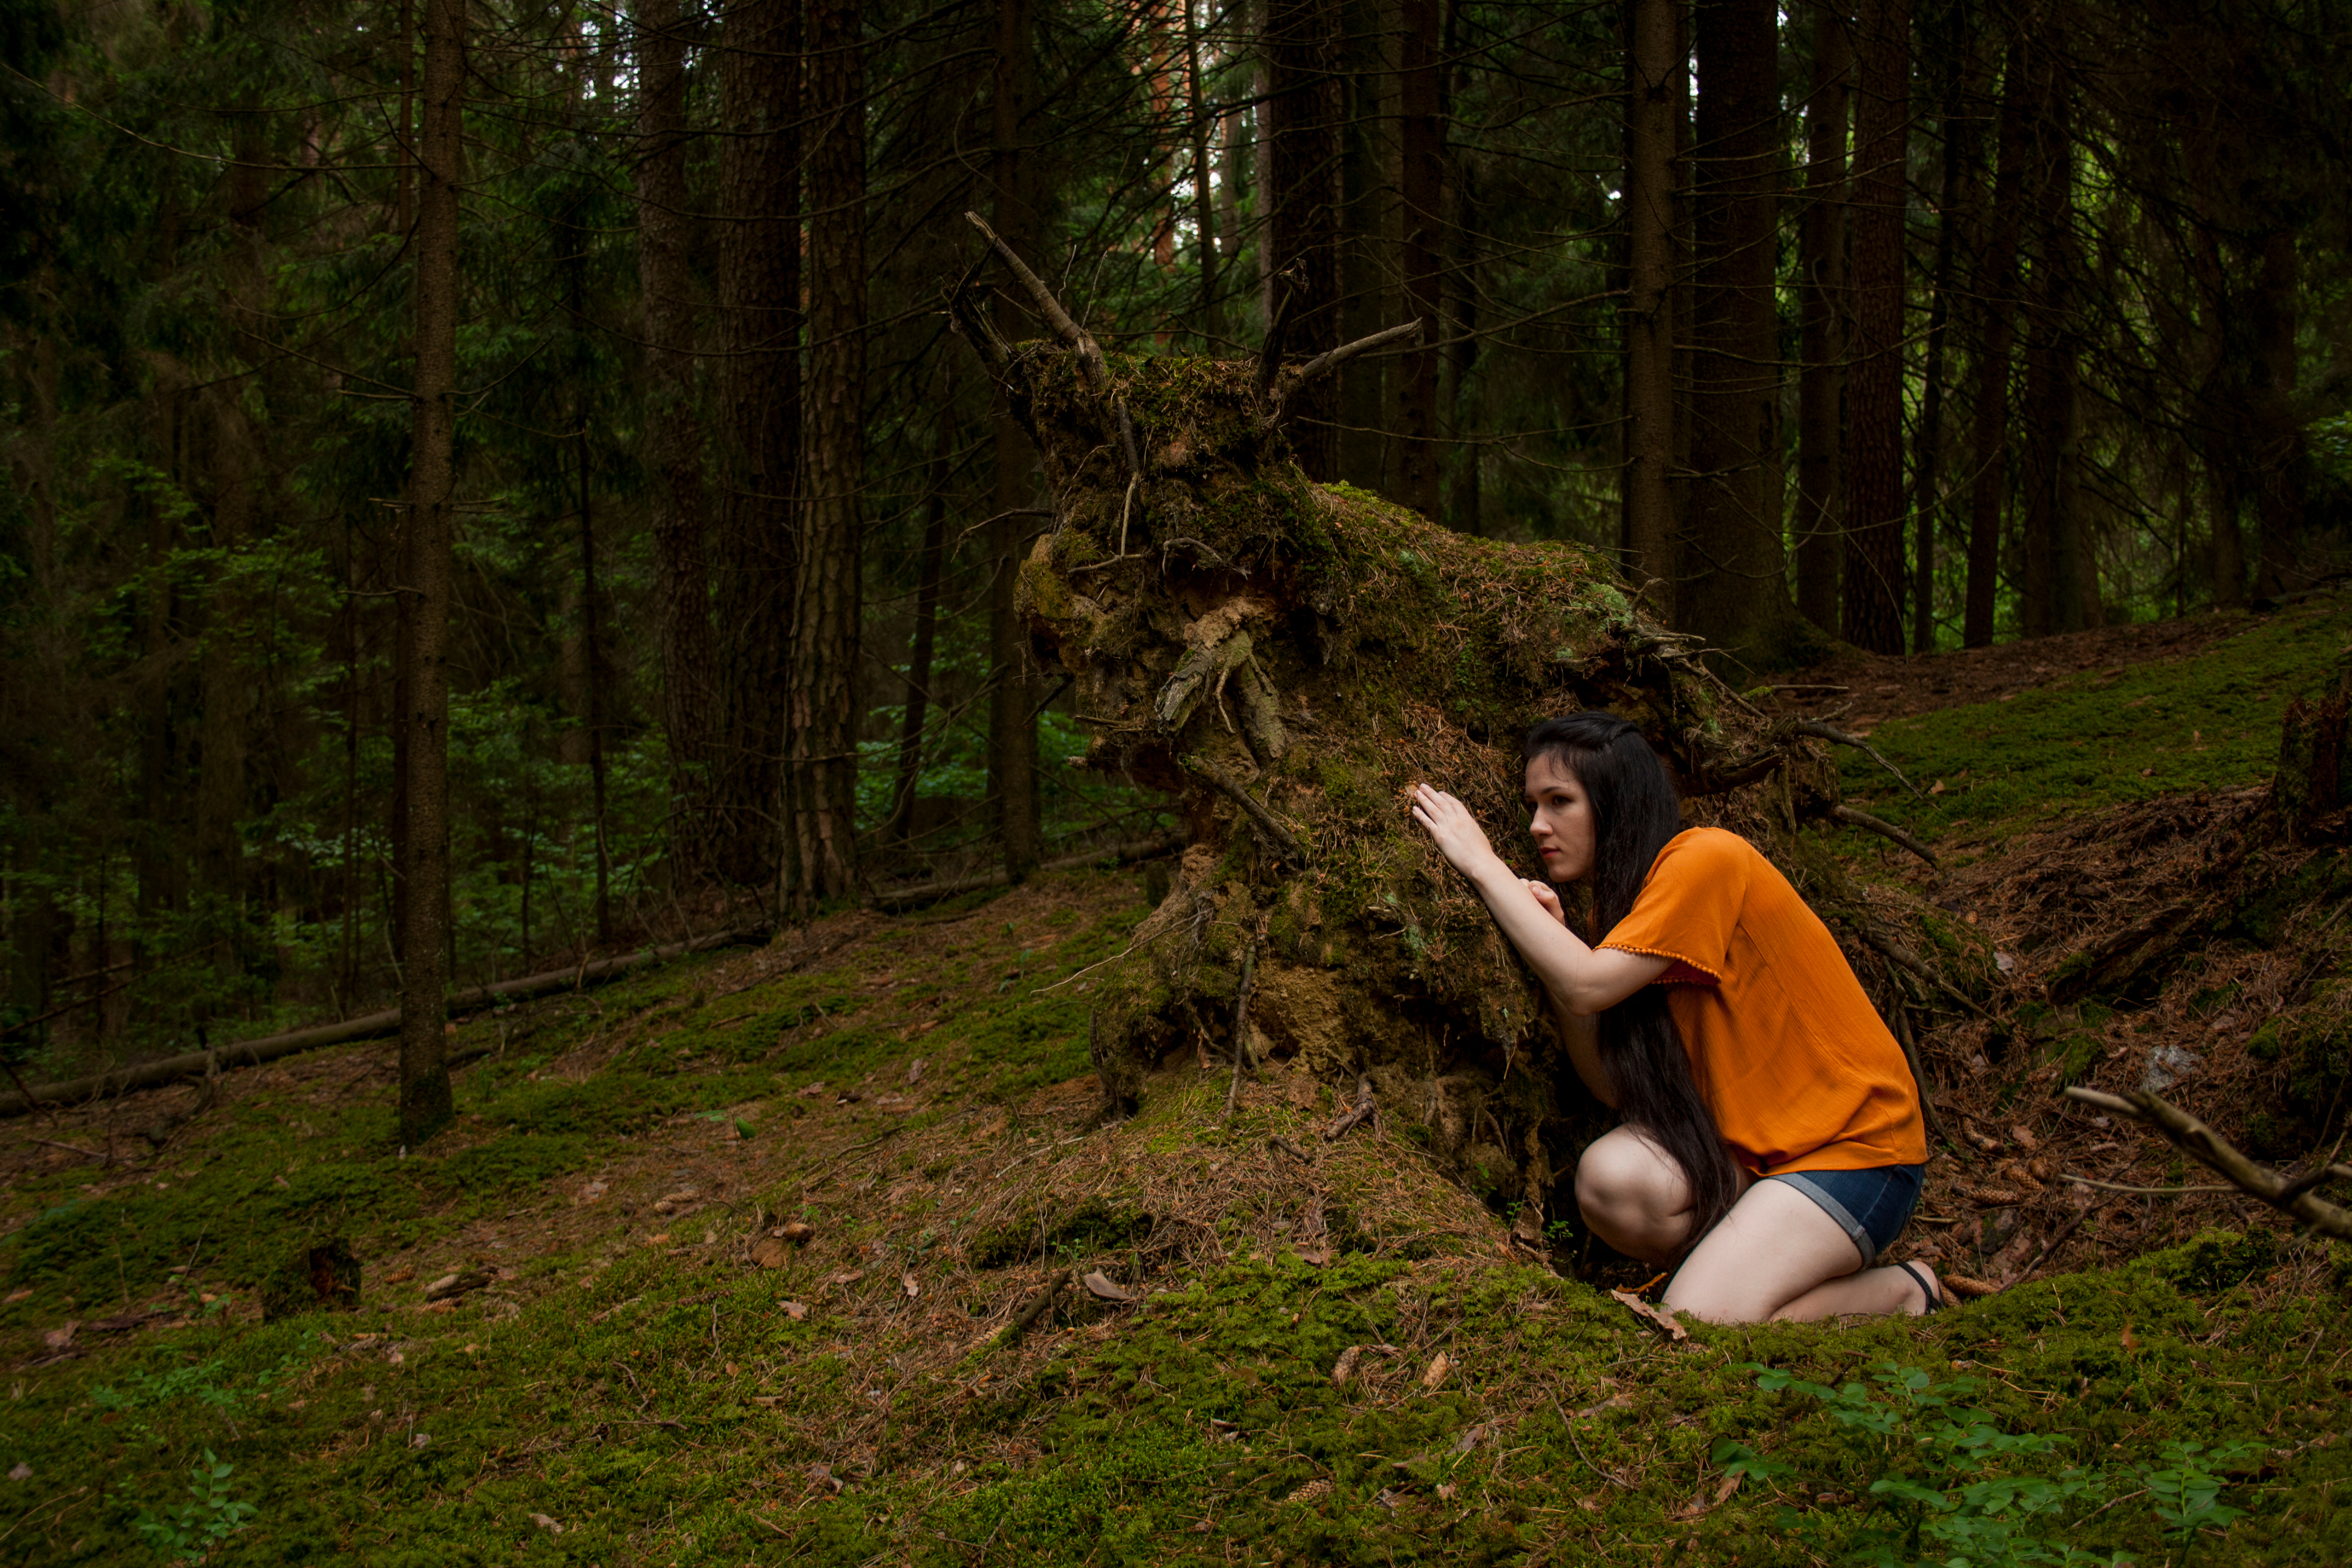 Young scared girl hiding in a forest behind a fallen tree | Source: Shutterstock.com